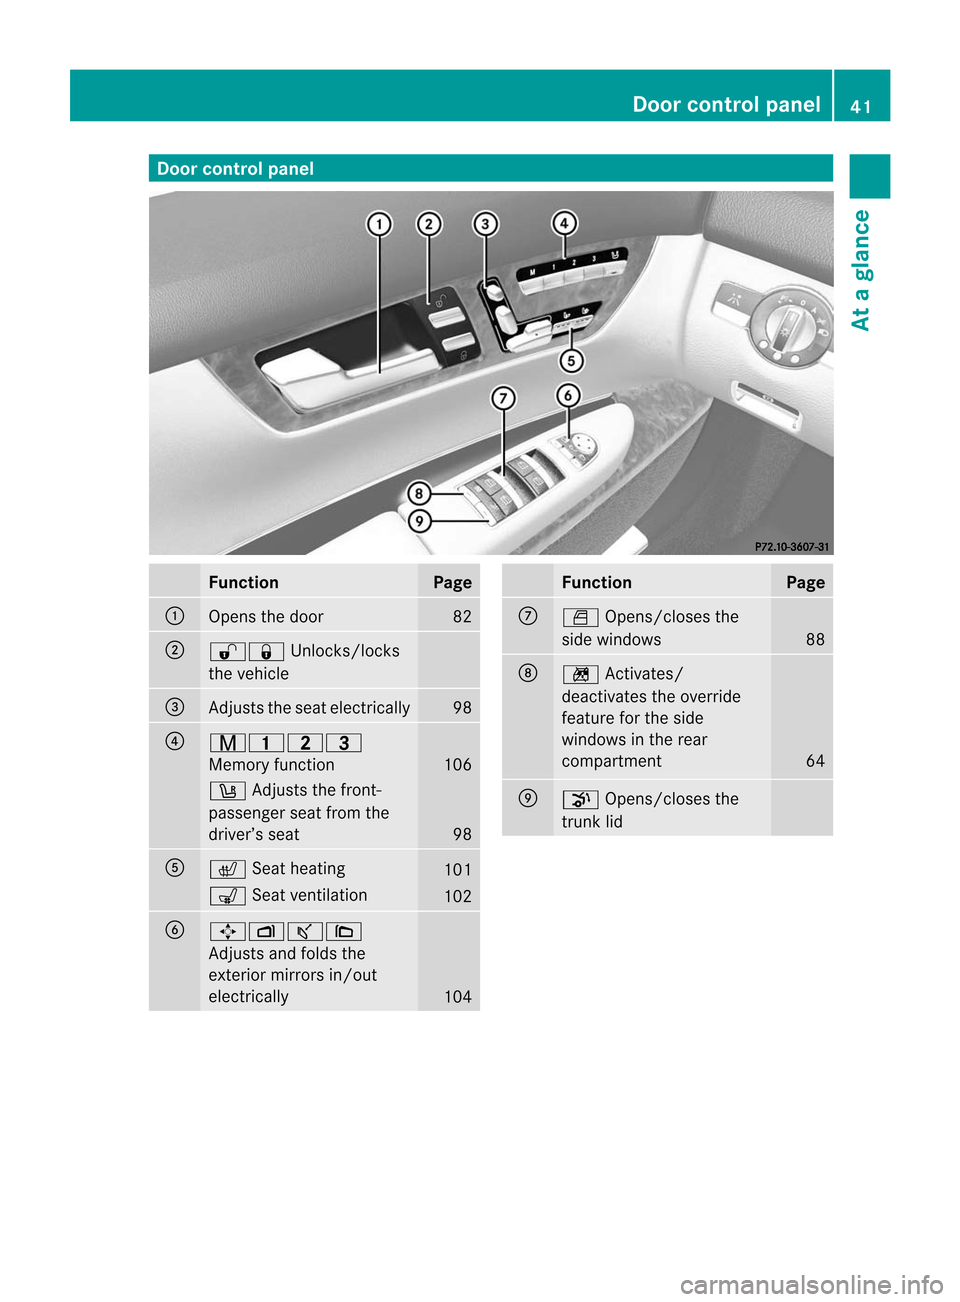 MERCEDES-BENZ CL-Class 2014 C217 Service Manual Door control panel
Function Page
:
Opens the door 82
;
%&
Unlocks/locks
the vehicle =
Adjusts the seat electrically 98
?
r45=
Memory function
106
w
Adjusts the front-
passenger seat from the
driver’